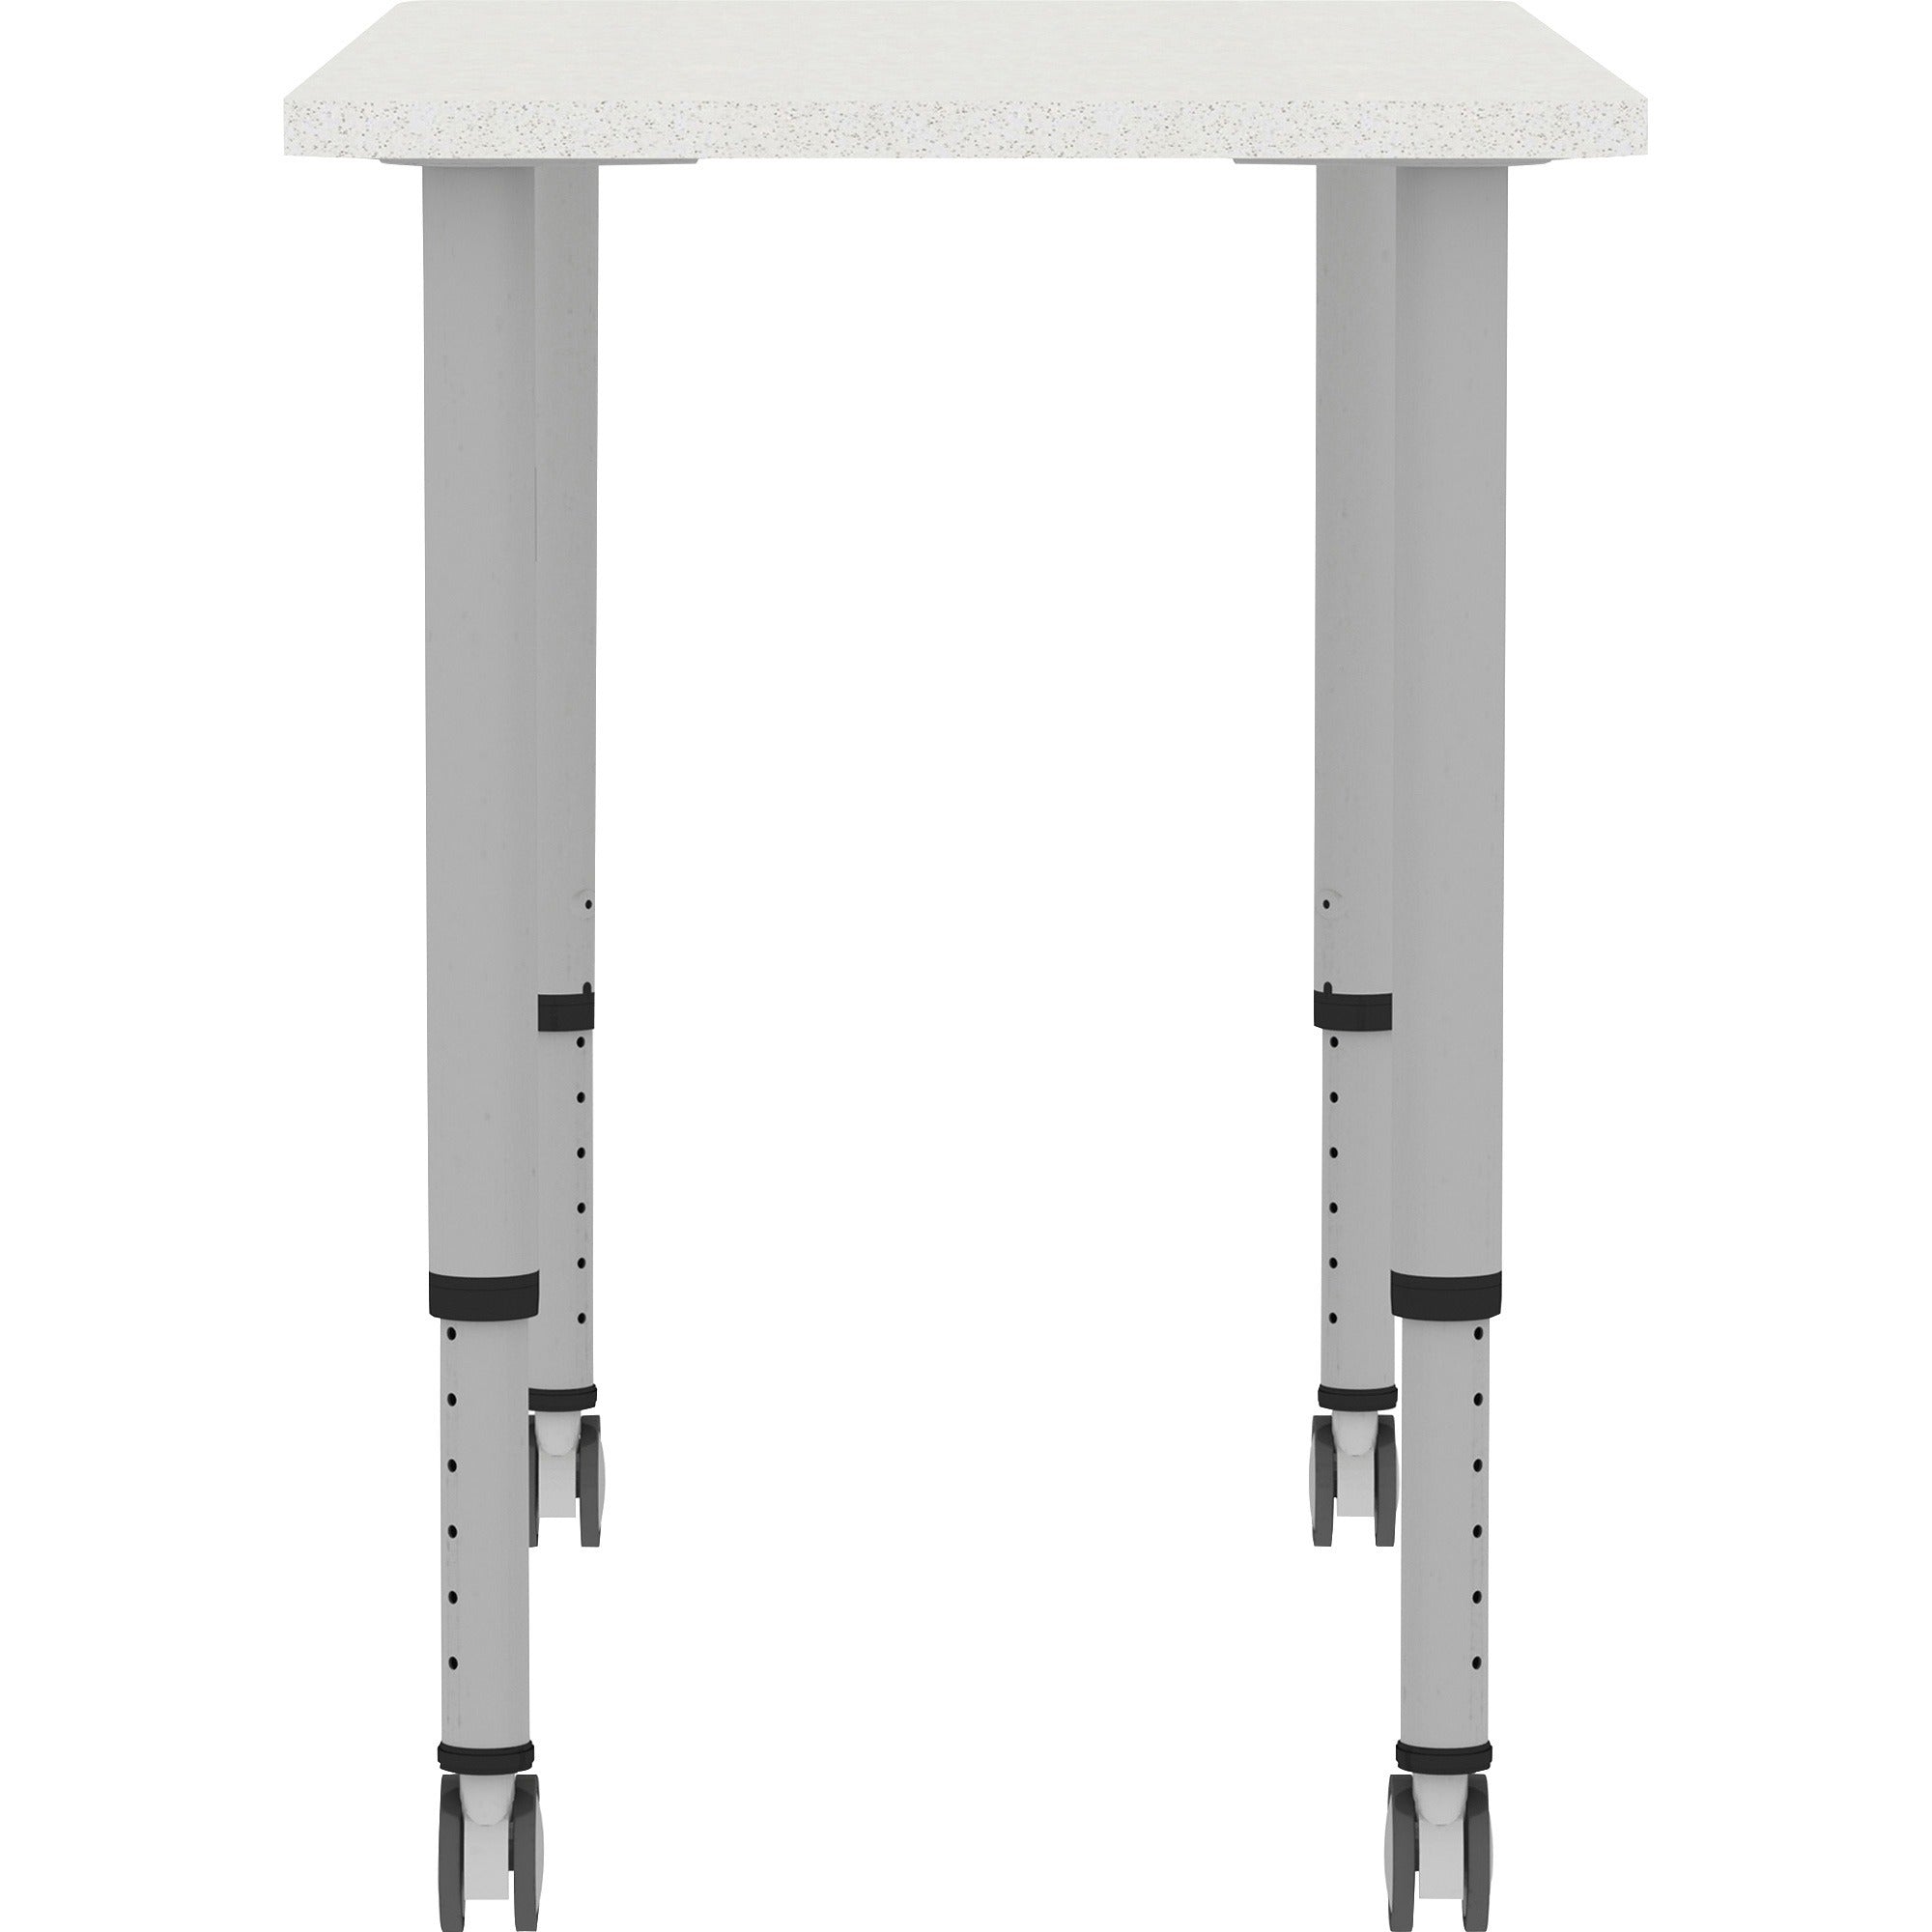 lorell-attune-height-adjustable-multipurpose-rectangular-table-for-table-toprectangle-top-adjustable-height-2662-to-3362-adjustment-x-48-table-top-width-x-2362-table-top-depth-3362-height-assembly-required-laminated-gray-lam_llr69581 - 4